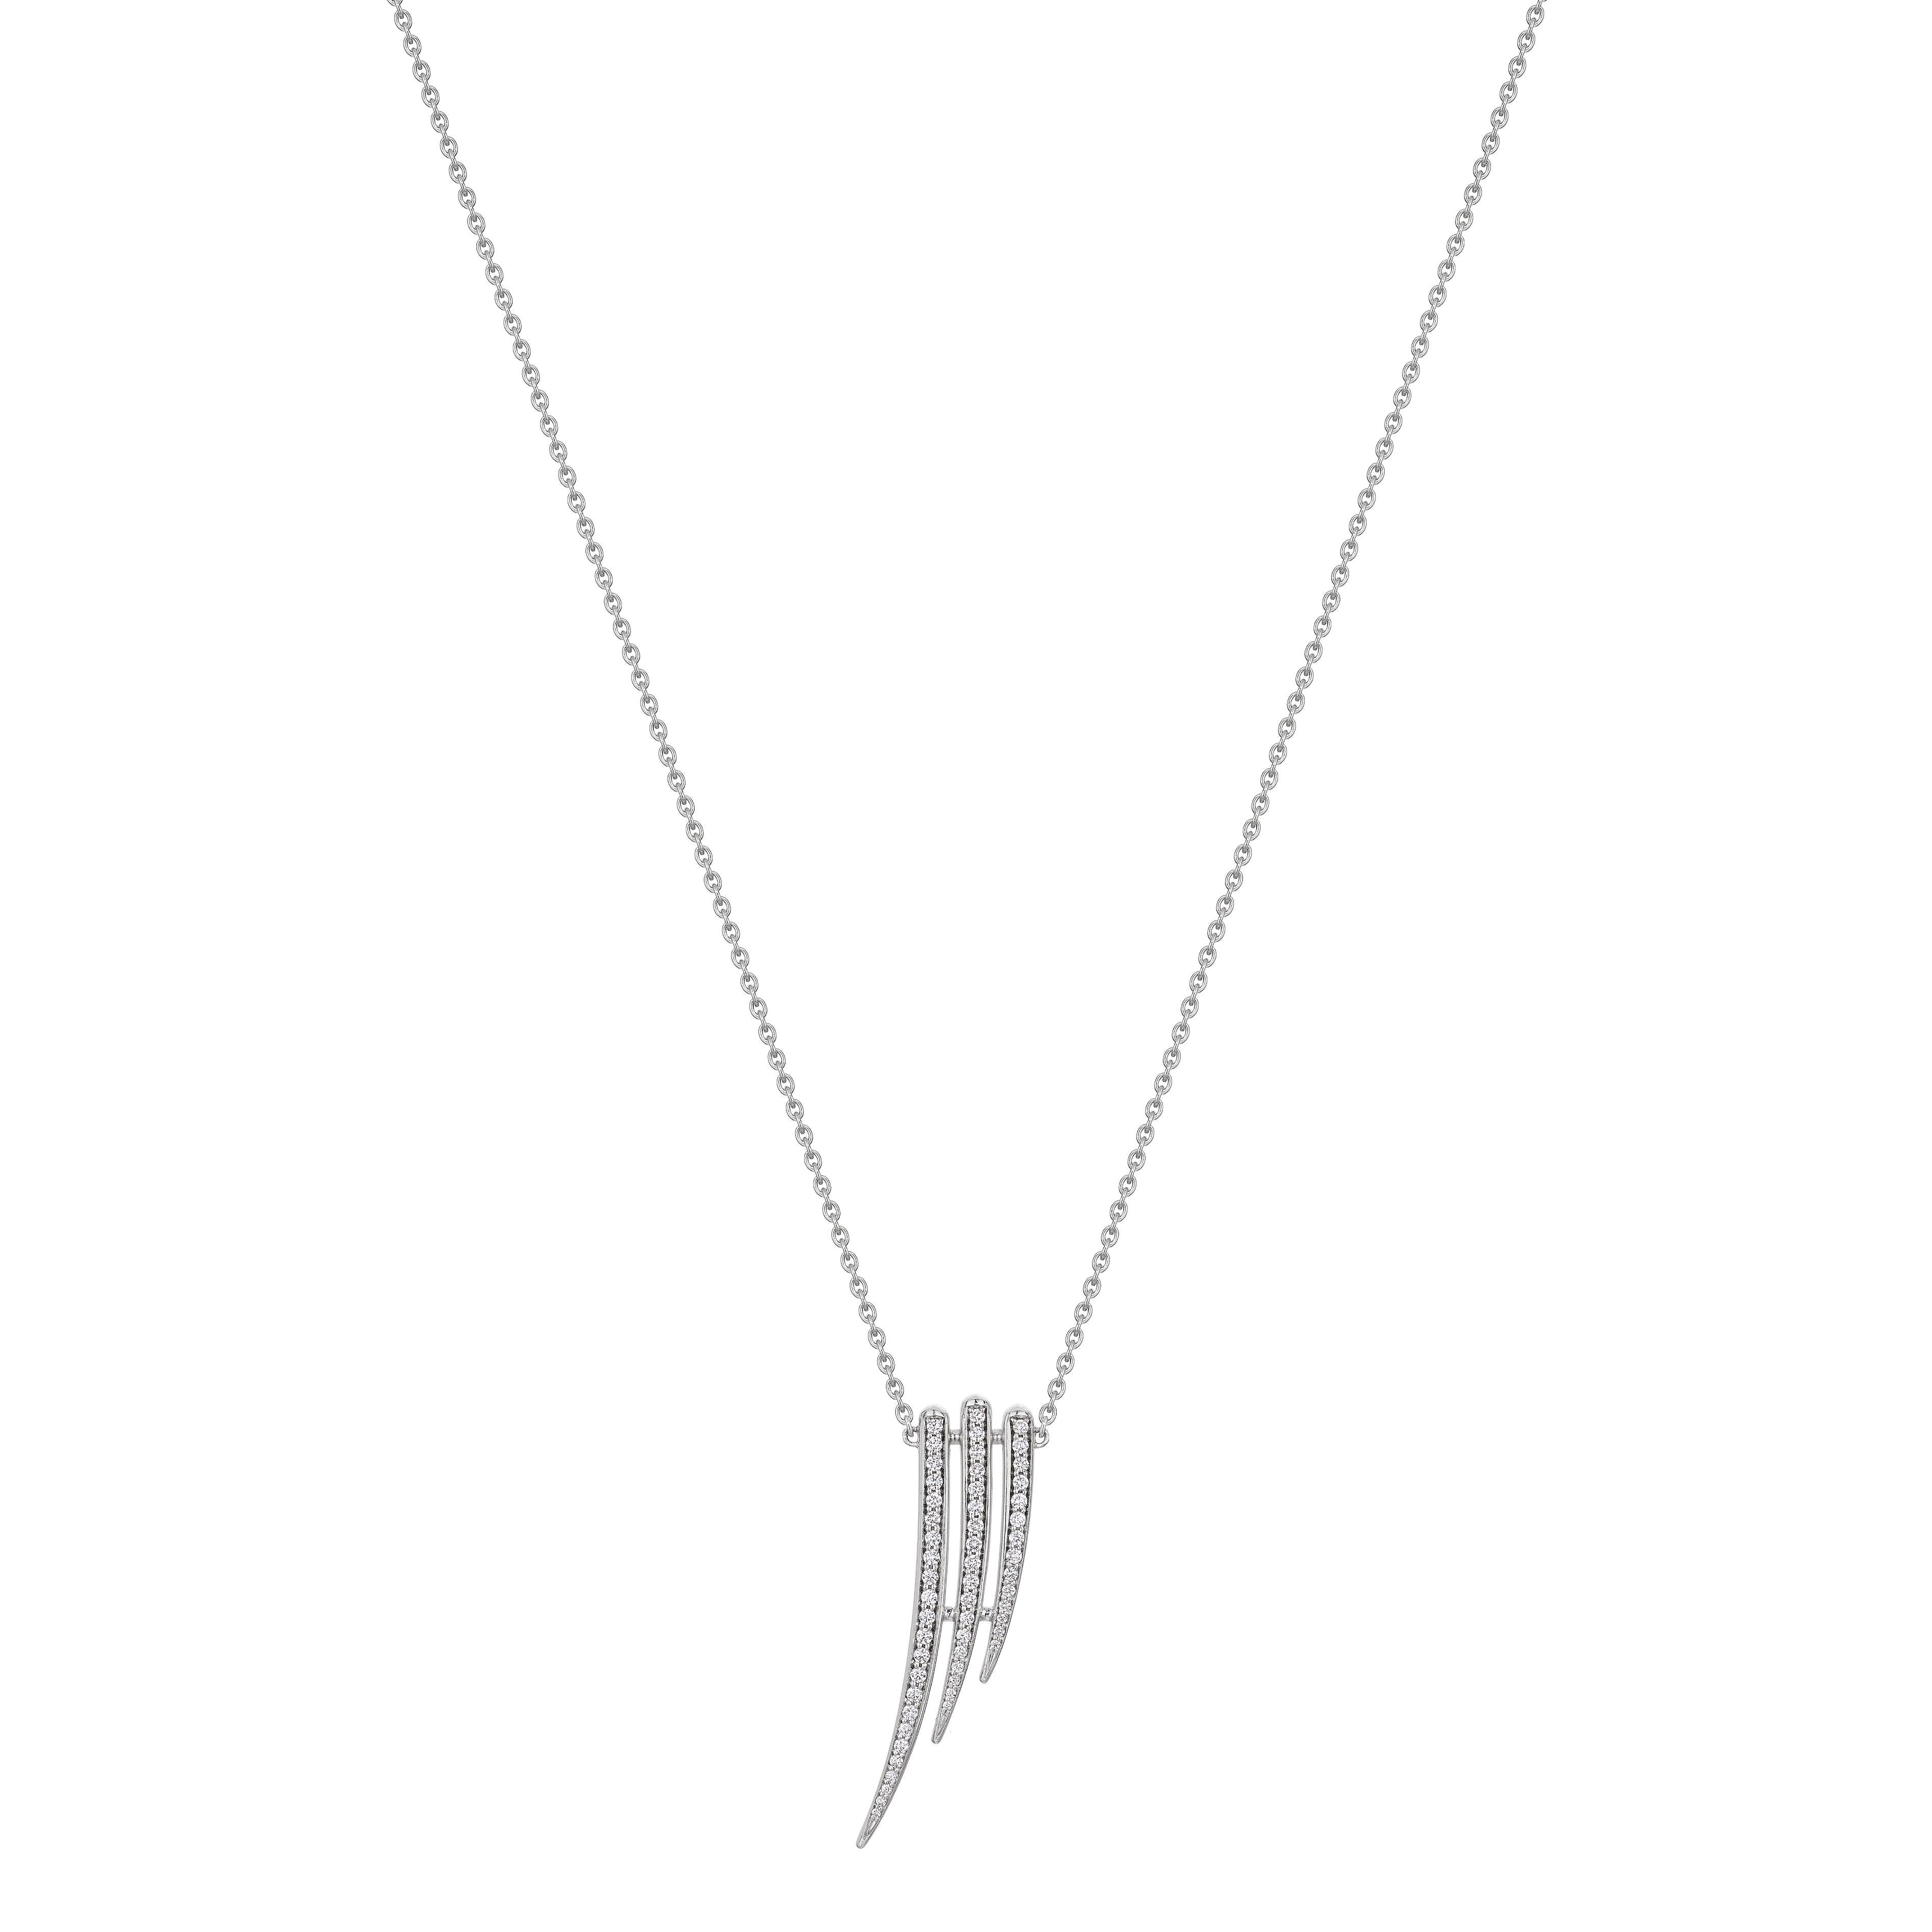 Crafted from 18ct white gold and 0.42cts of brilliant white diamonds, Armis Cascade Necklace balances symmetry with perfect proportions. Three fluid lines of cascading diamonds sweep the décolletage in a sensual movement. The House of Shaun Leane’s